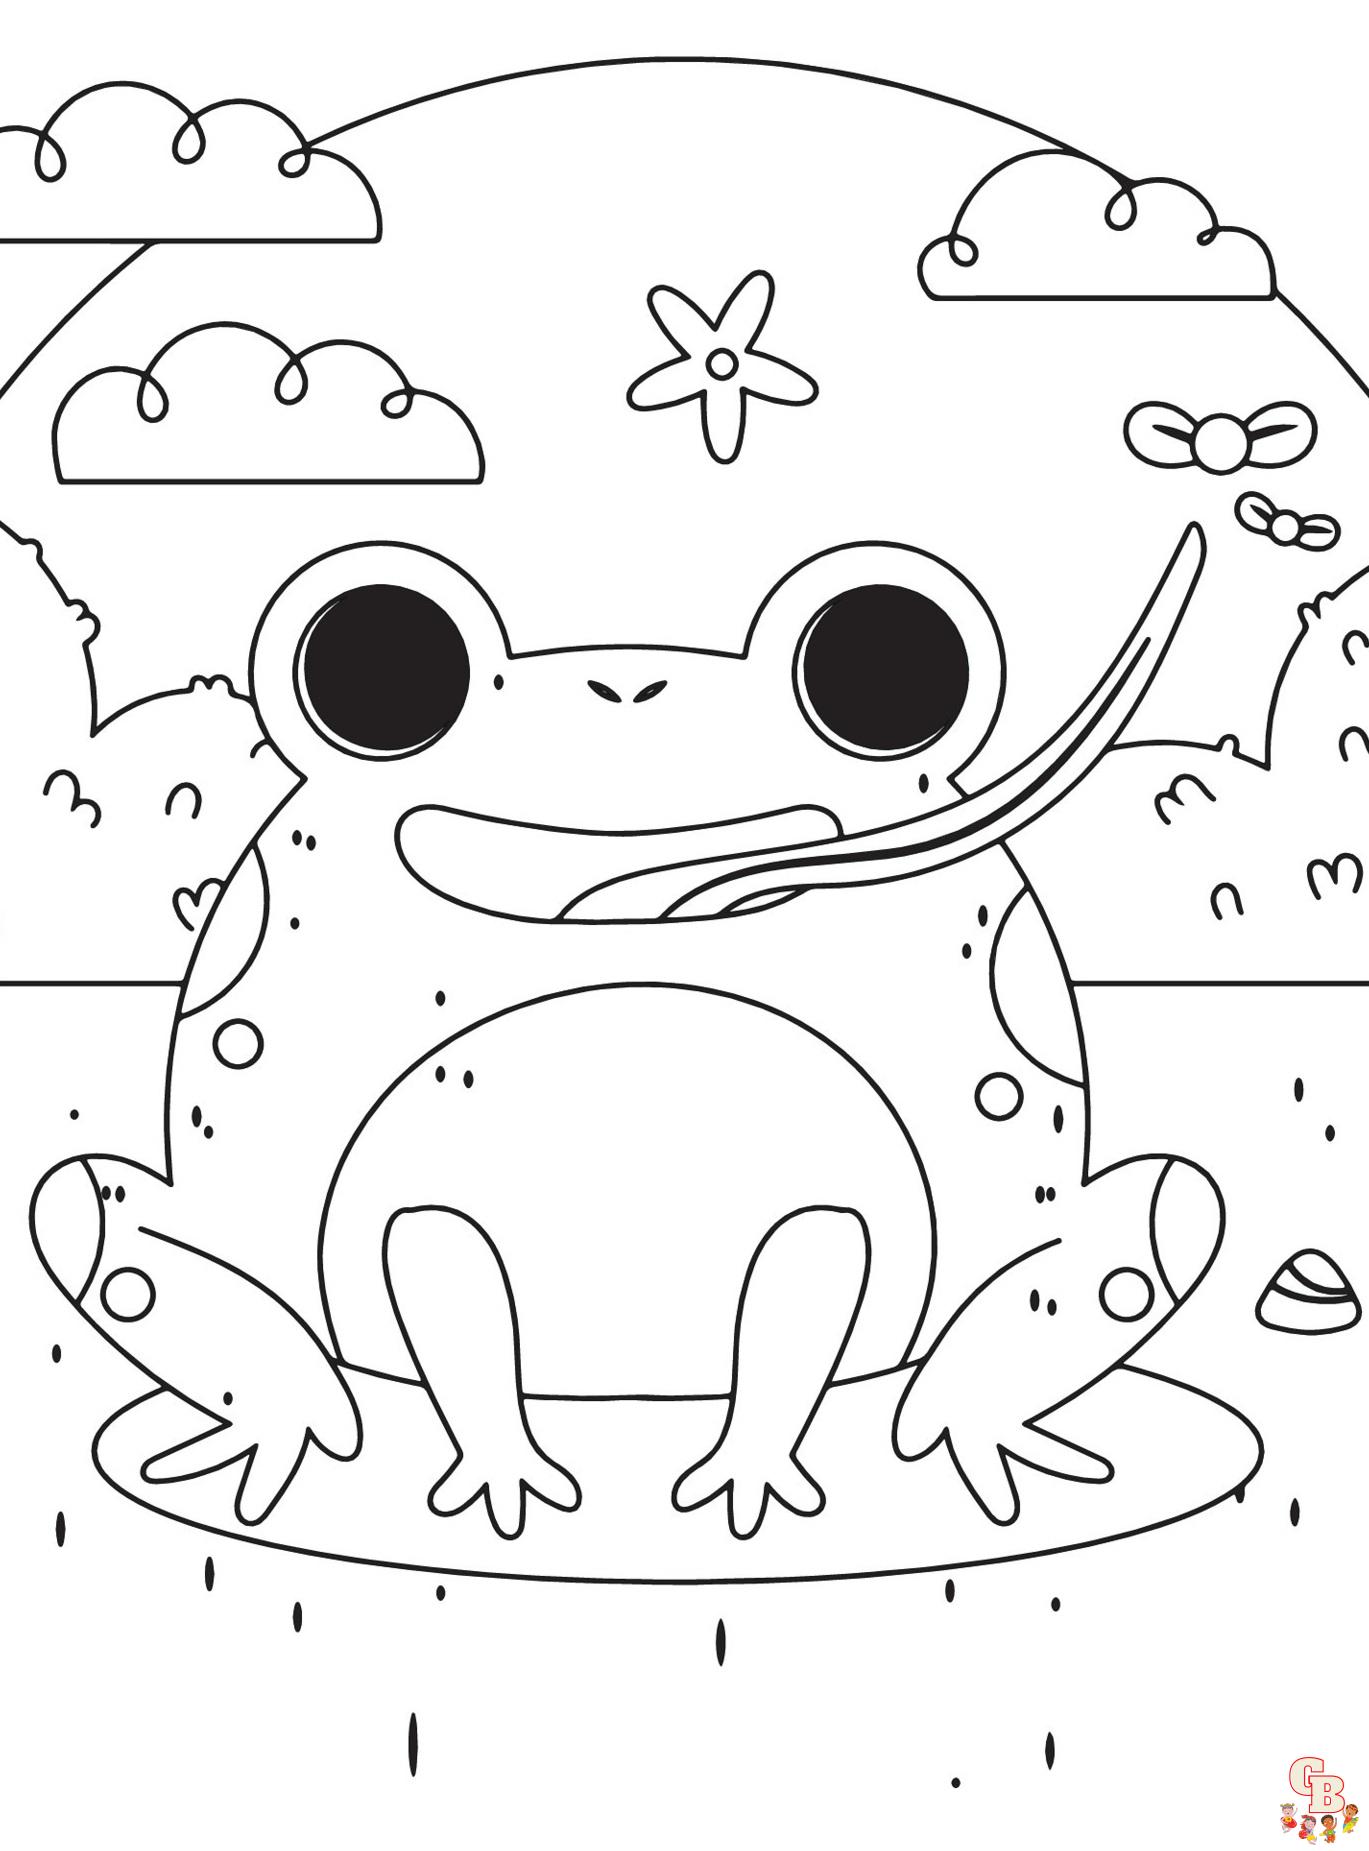 Cute Frog coloring pages free